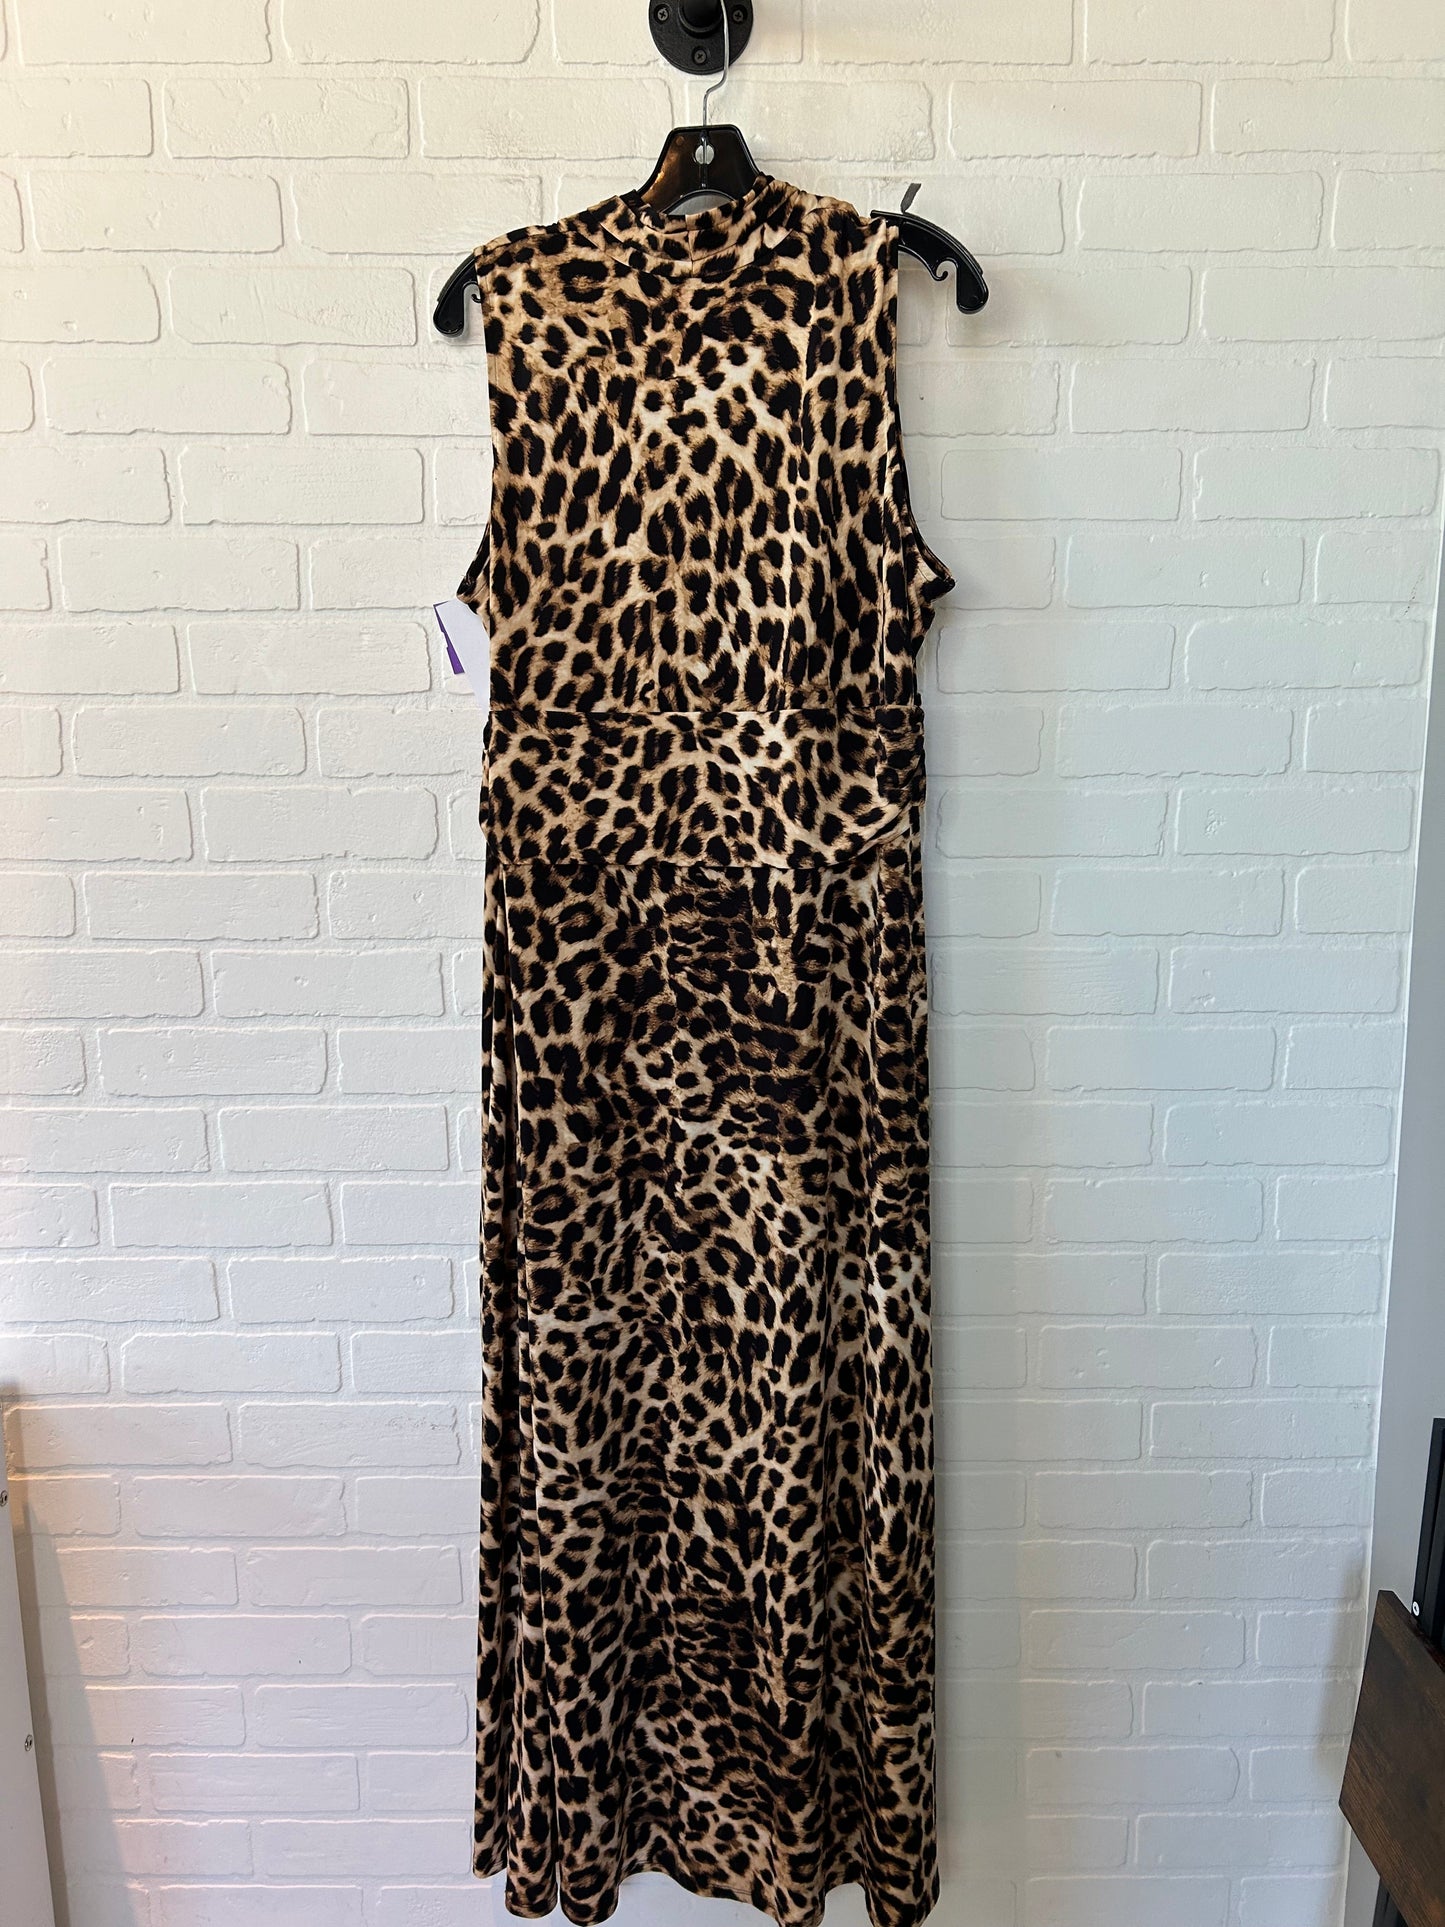 Blue & Brown Dress Casual Maxi Vince Camuto, Size 1x